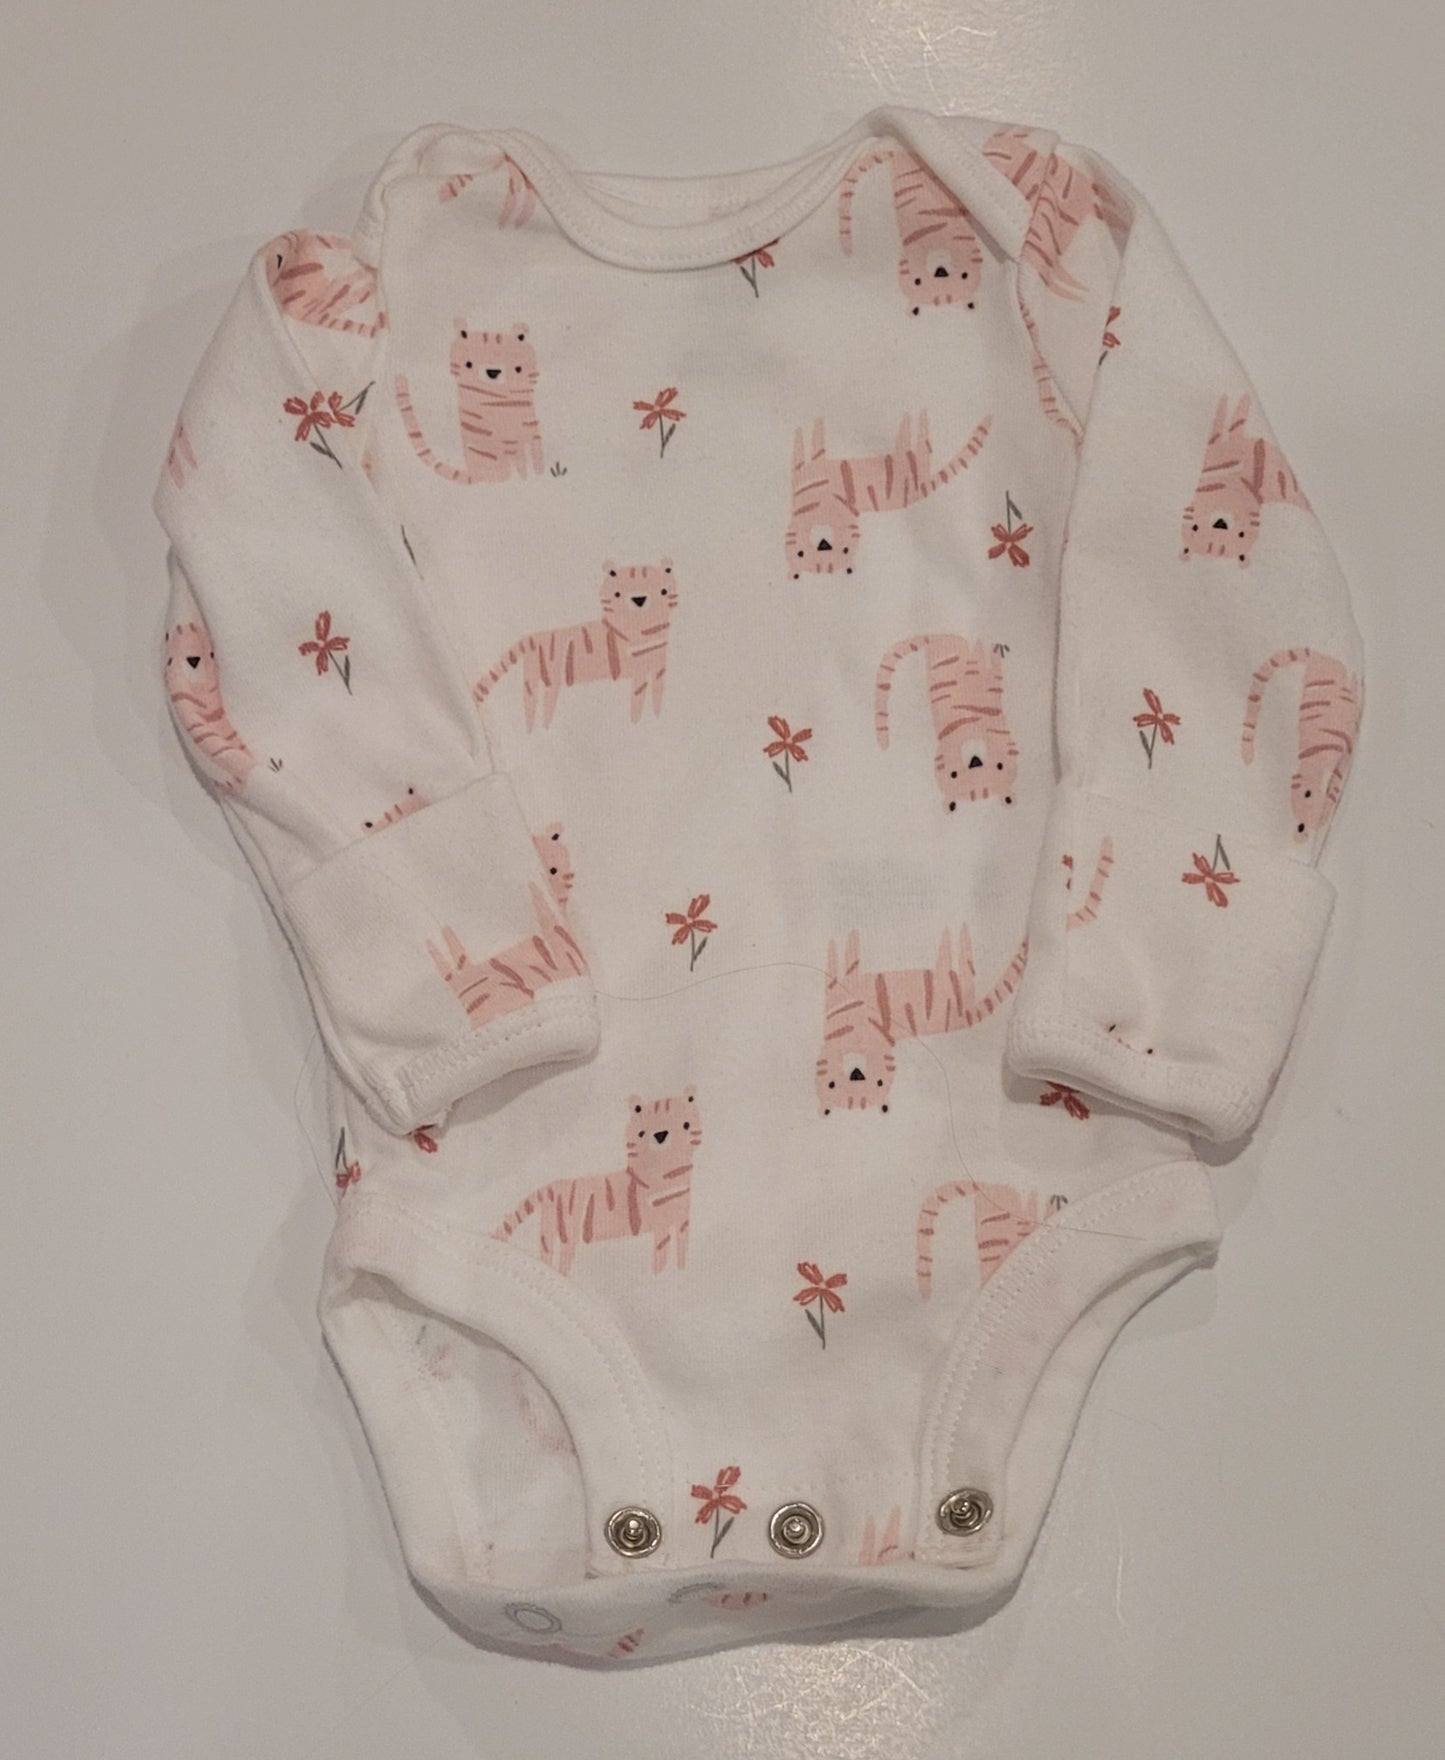 Newborn - Just One You by Carters - Long sleeve onesie